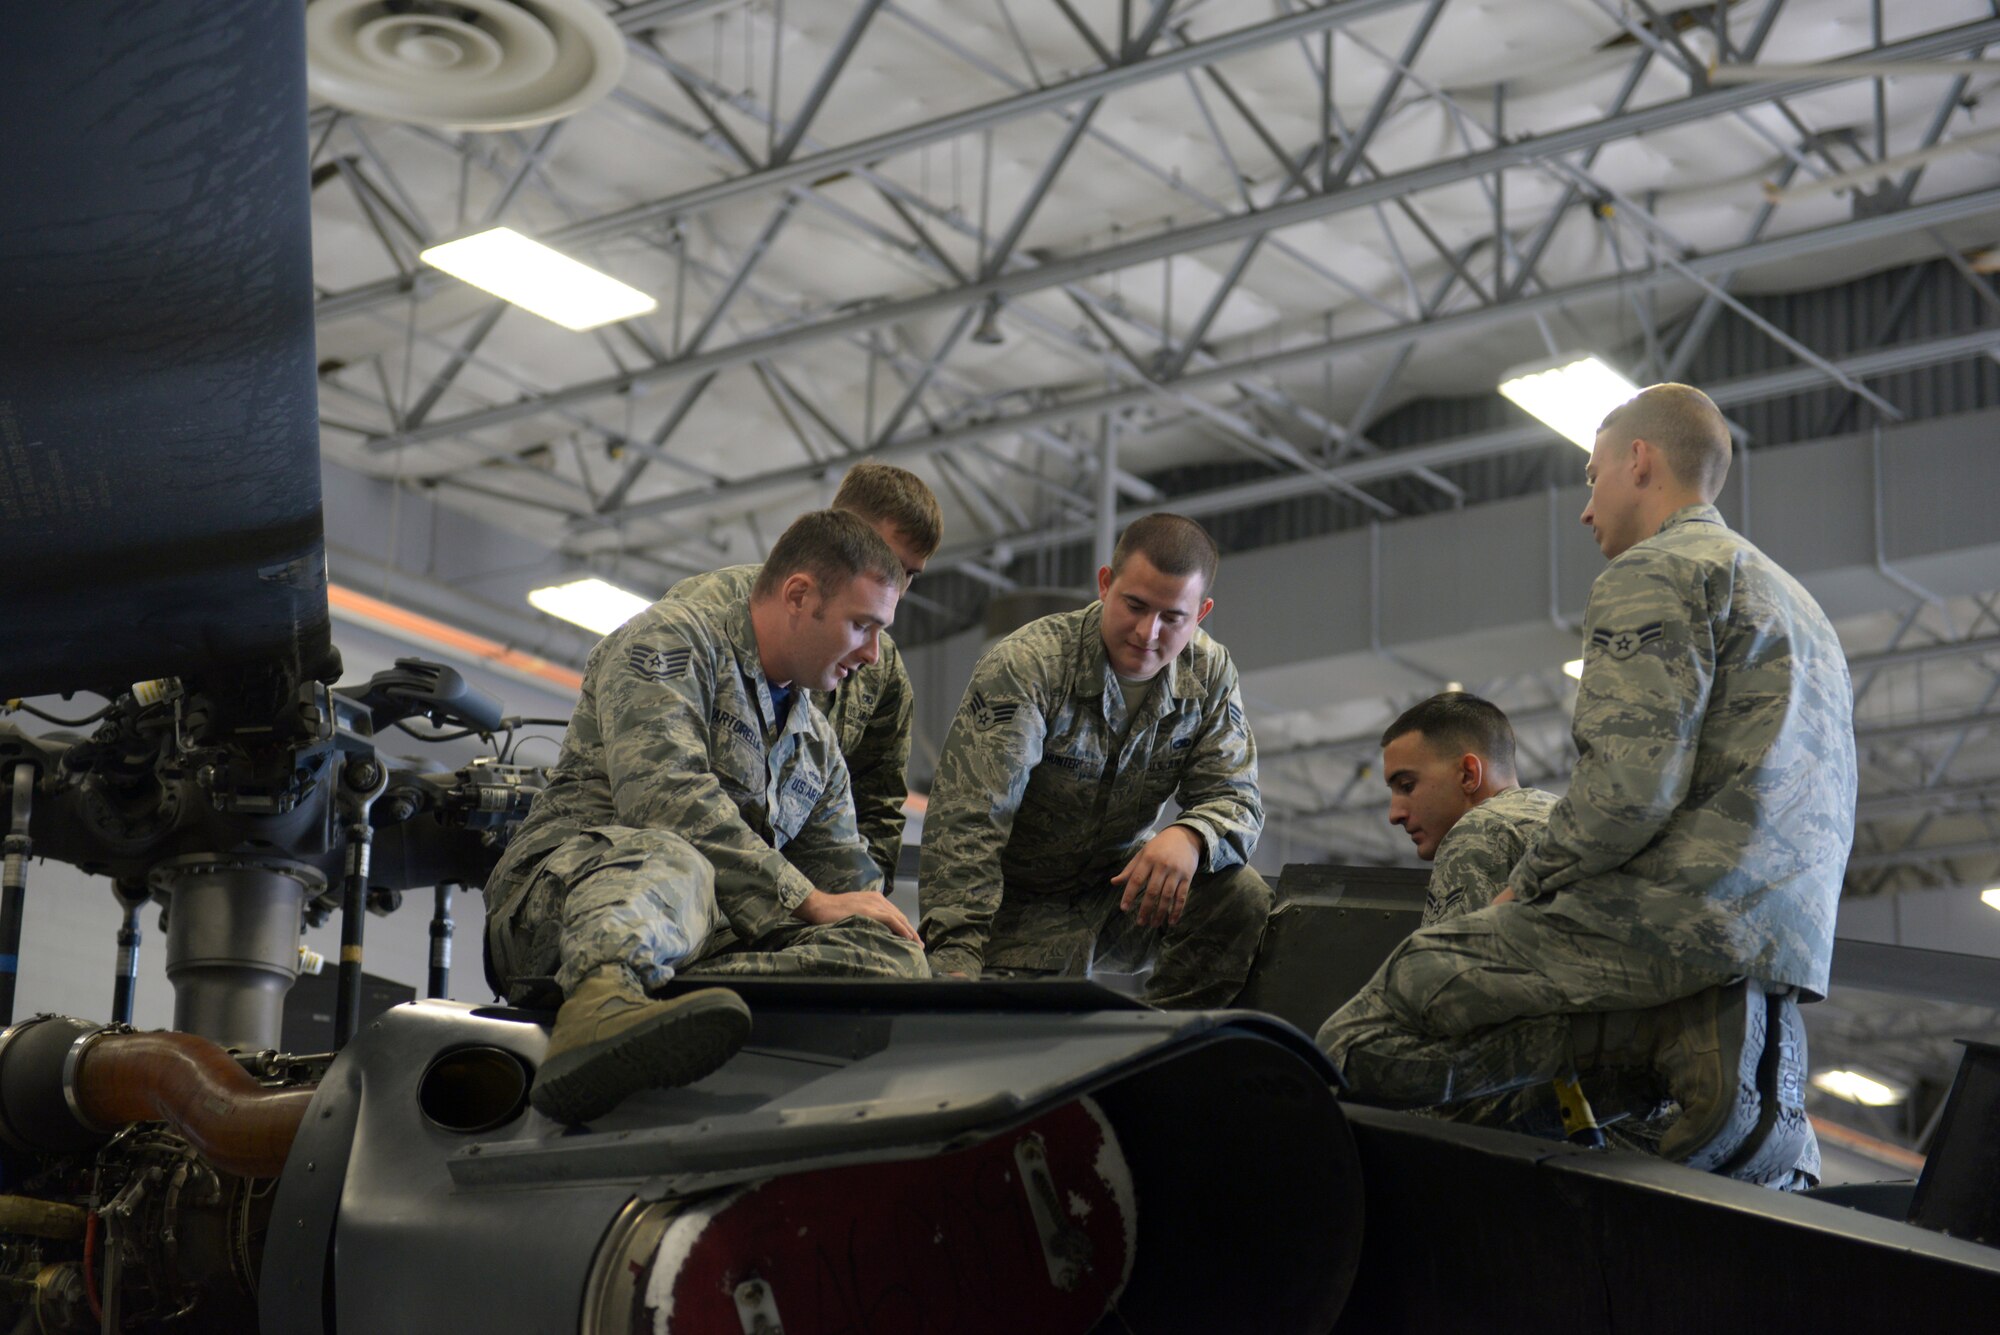 Staff Sgt. Ryan Martorella, Detachment 13, 372nd Training Squadron HH-60G pave Hawk crew chief instructor, teaches a specialized advanced training class at the 823rd MXS hangar on Nellis Air Force Base, Nev., Sept. 19, 2015. Detachment 13 is an Air Education and Training Command detachment with approximately 35 instructors across 15 Air Force Specialty Codes (U.S. Air Force photo by Airman 1st Class Rachel Loftis)